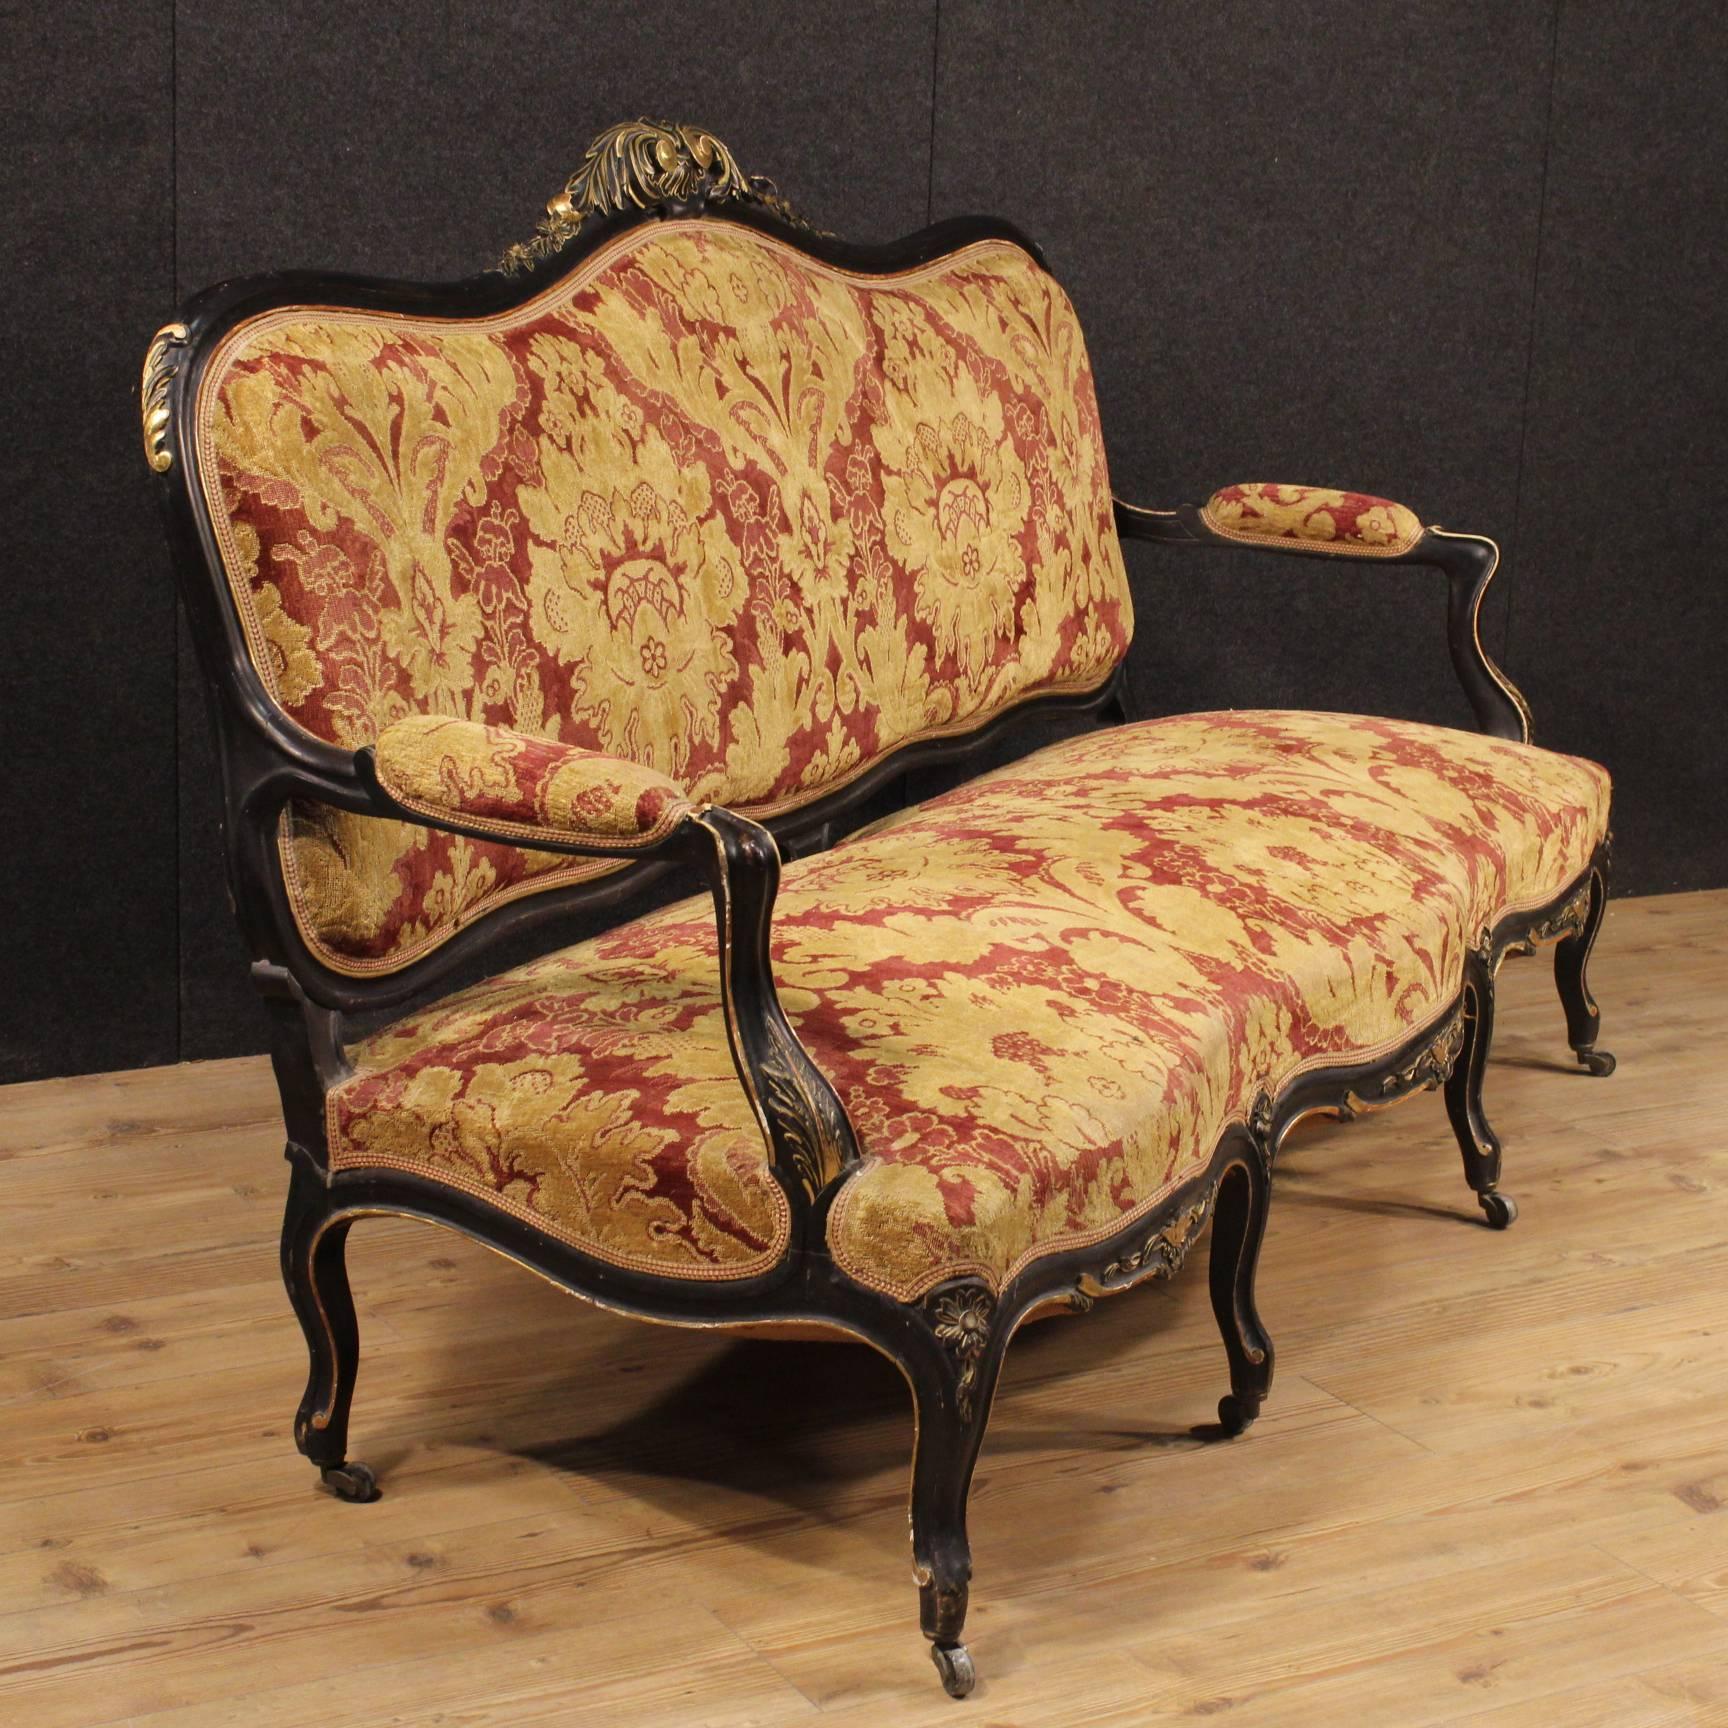 Stylish French sofa of the early 20th century. Furniture in finely carved, lacquered and gilded wood, very pleasant. Sofa of good comfort covered in damask velvet with some signs of wear. Seat and back with padding in good condition. Height to seat: